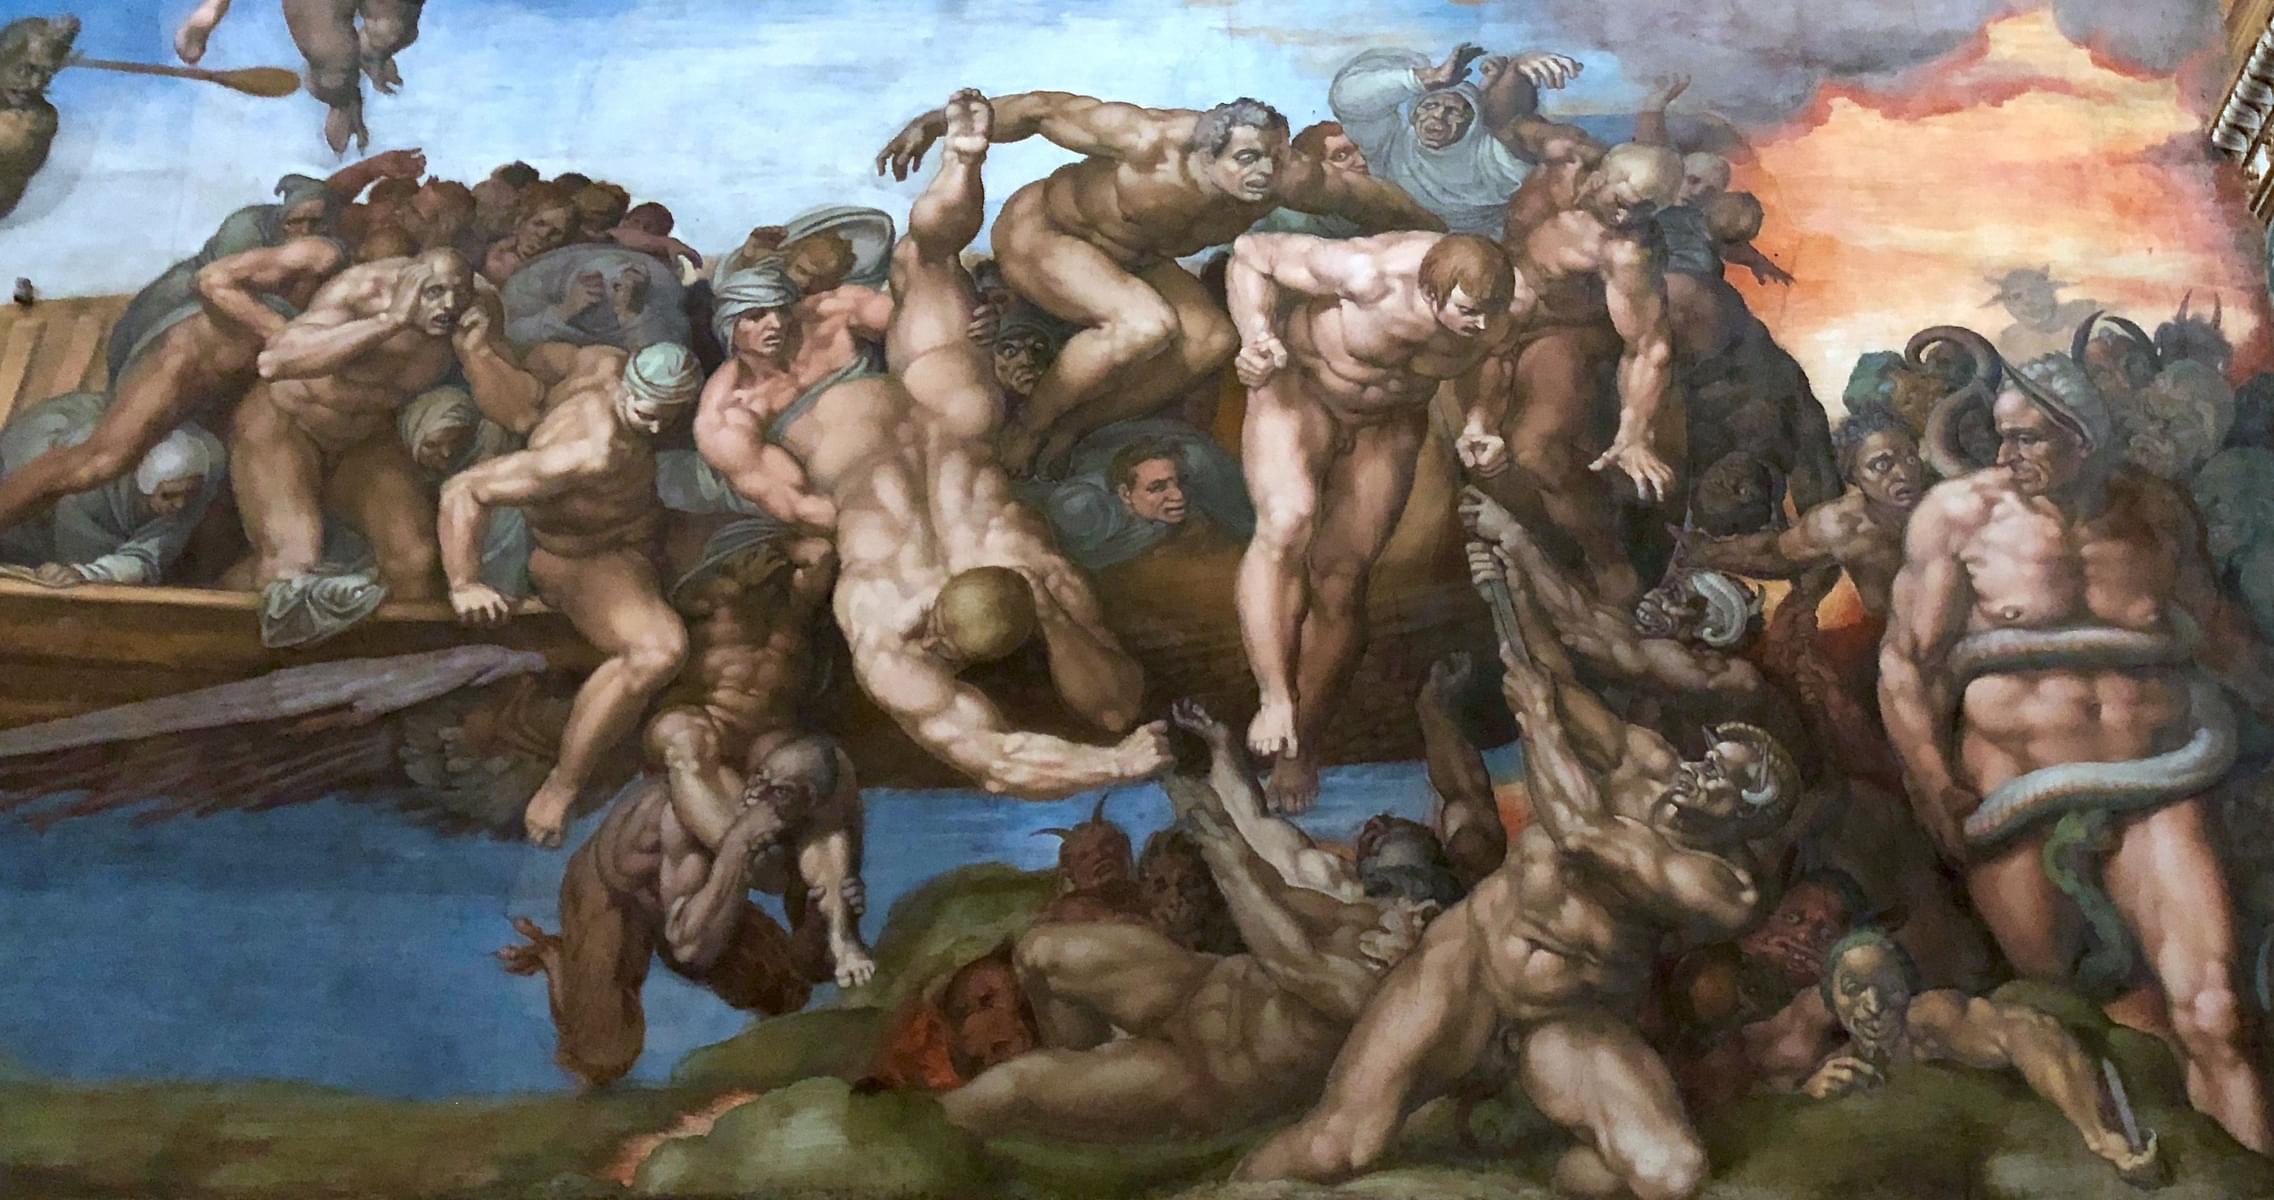 See Michelangelo's Last Judgment at the Vatican Museums